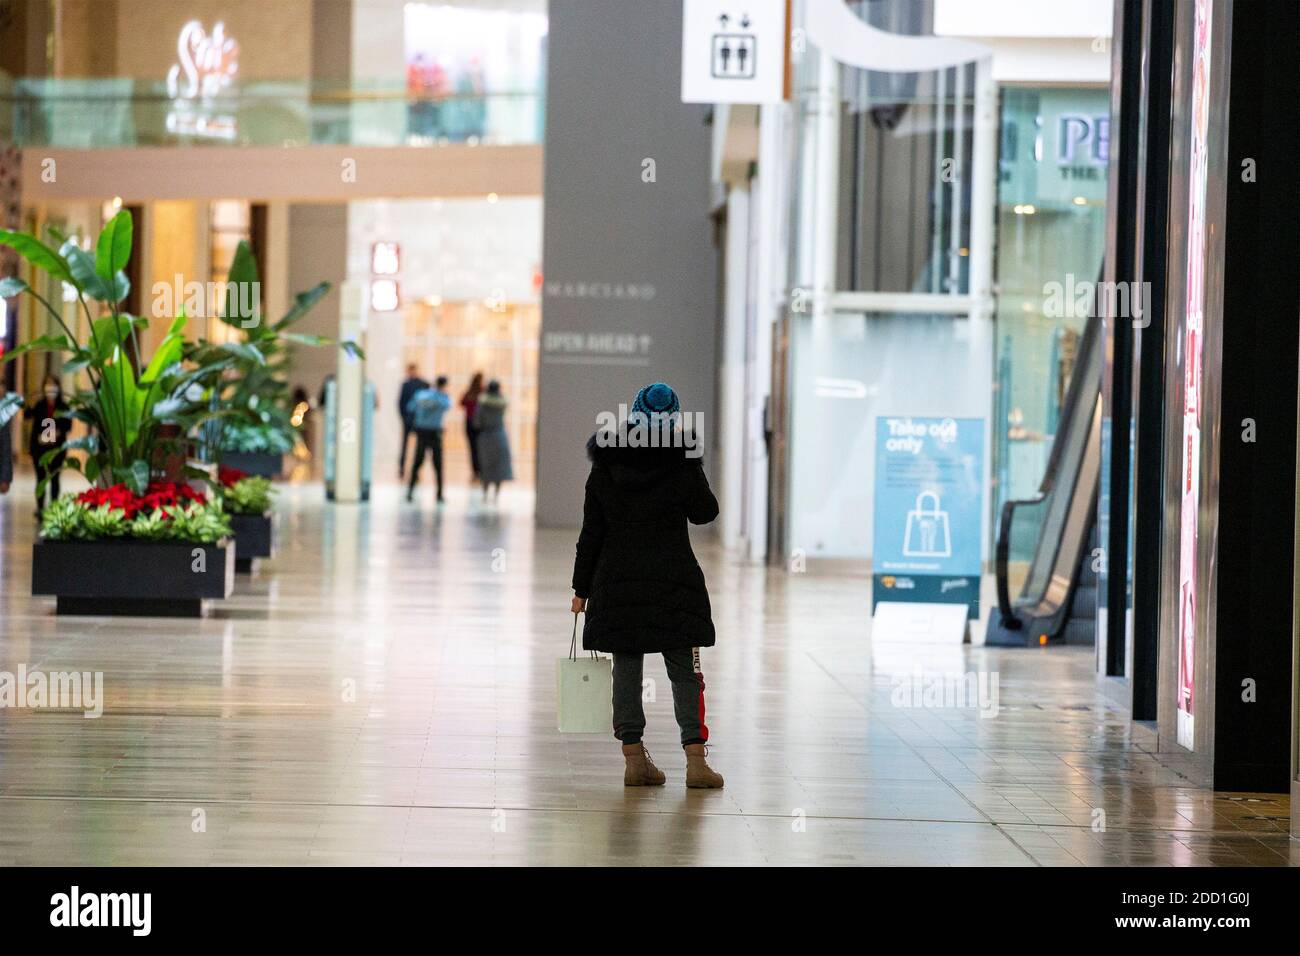 Person speaks on the phone at Yorkdale Shopping Centre during a renewed coronavirus lockdown due to a spike in cases in Toronto, Ontario, Canada November 23, 2020. REUTERS/Carlos Osorio Stock Photo